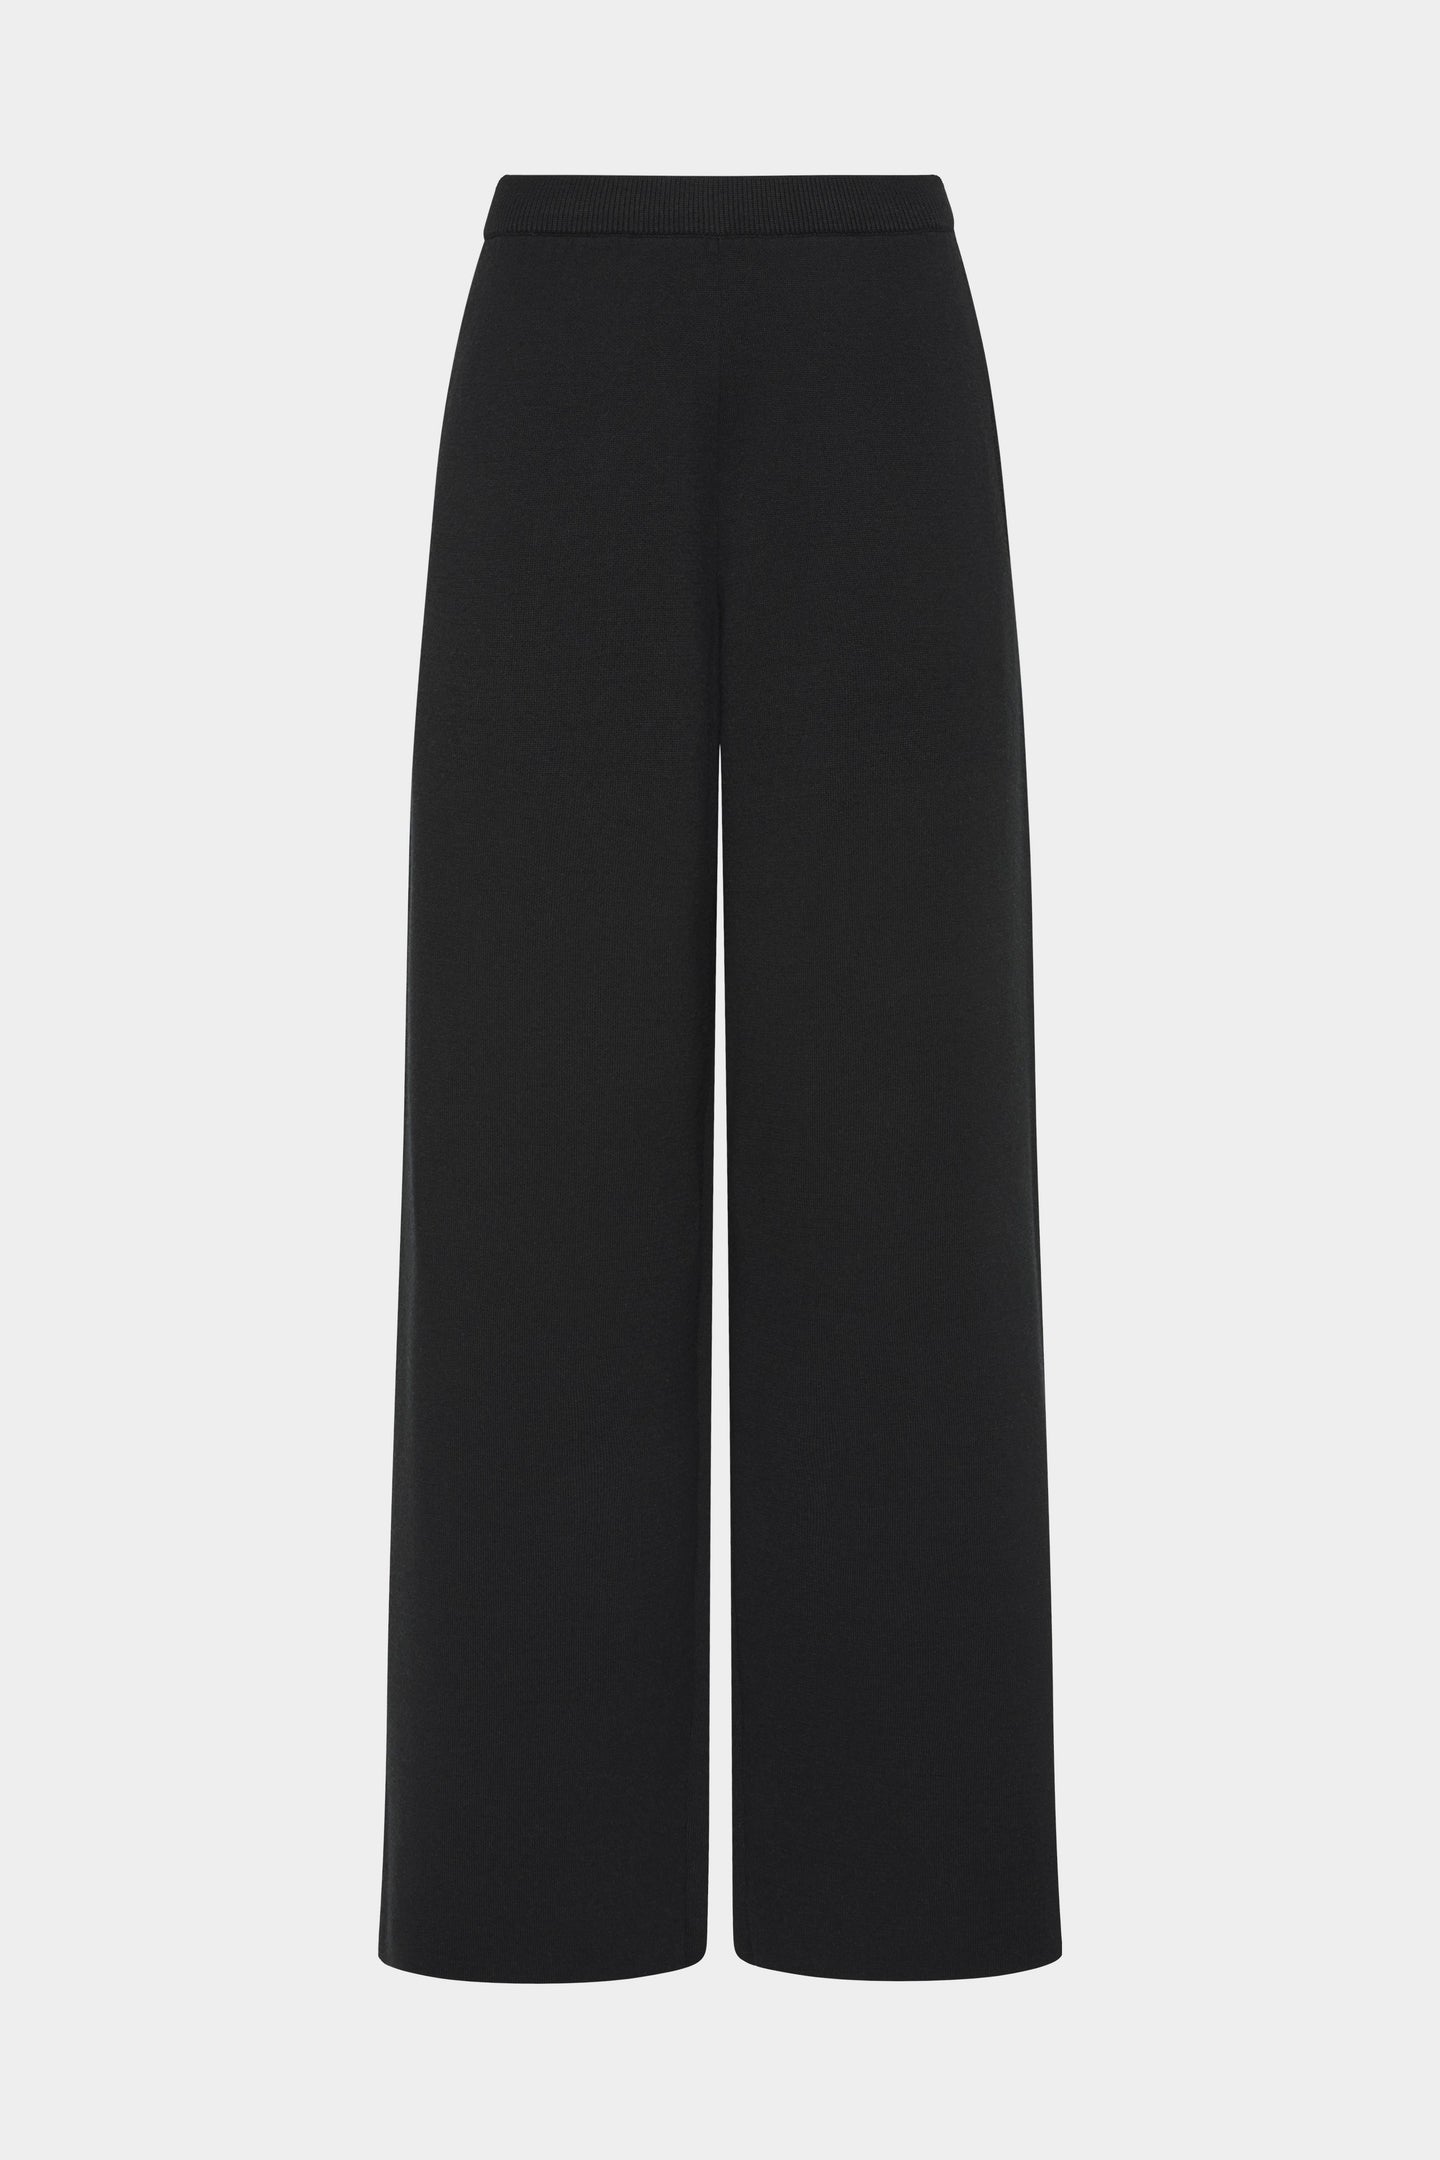 SIR the label Playback Knit Pant BLACK